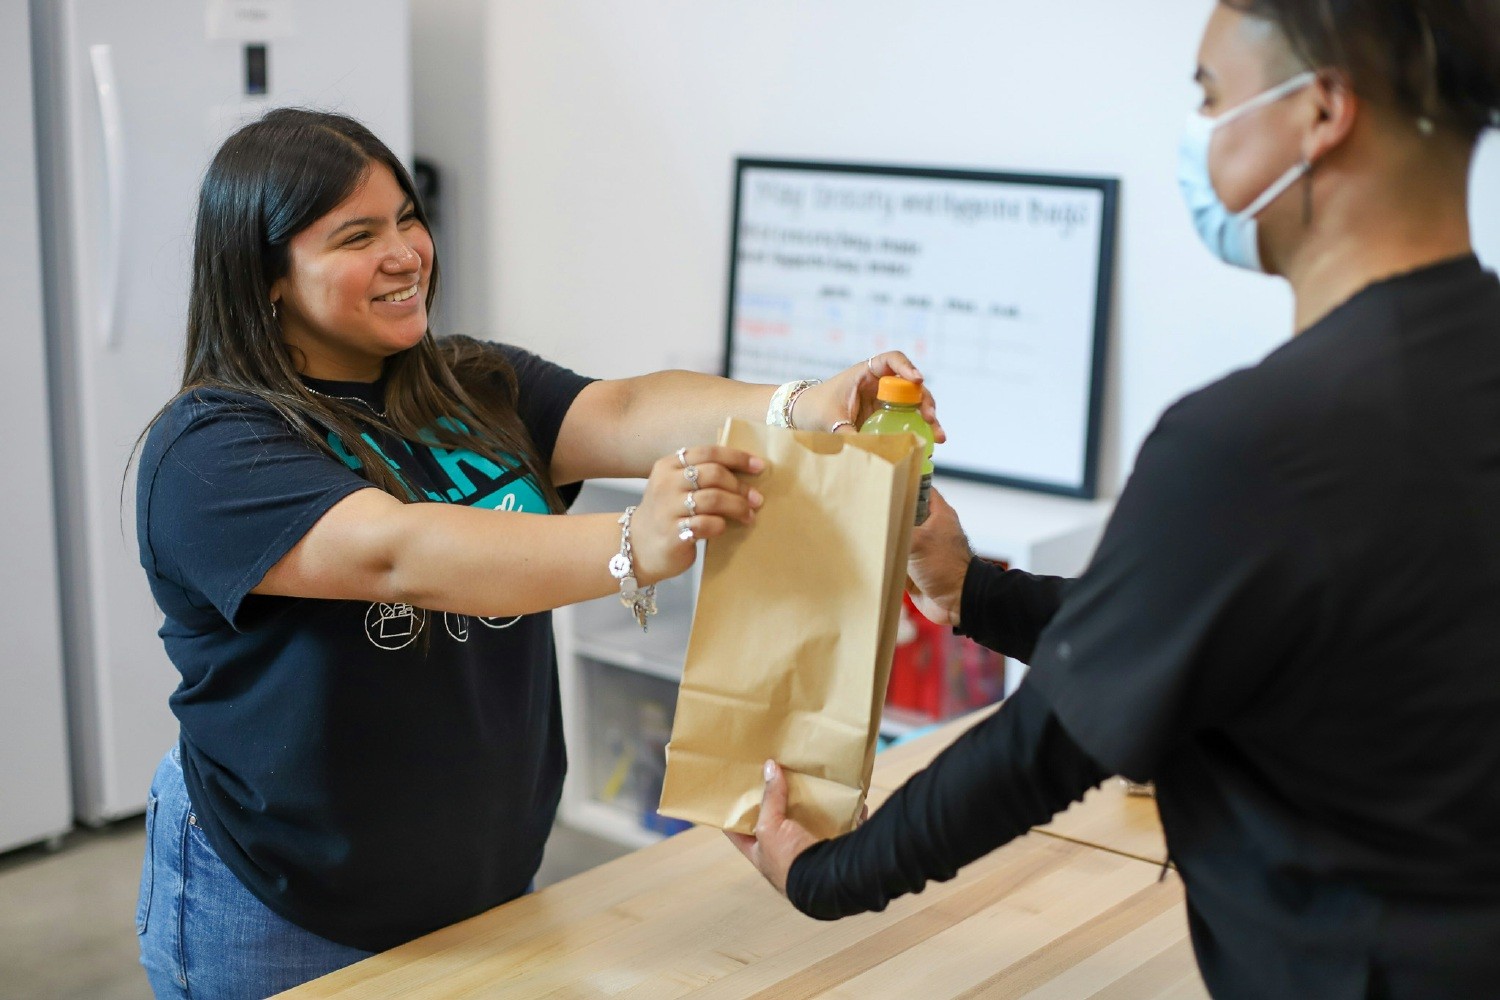  A Palo Alto College employee provides a free meal to a student at the campus food pantry